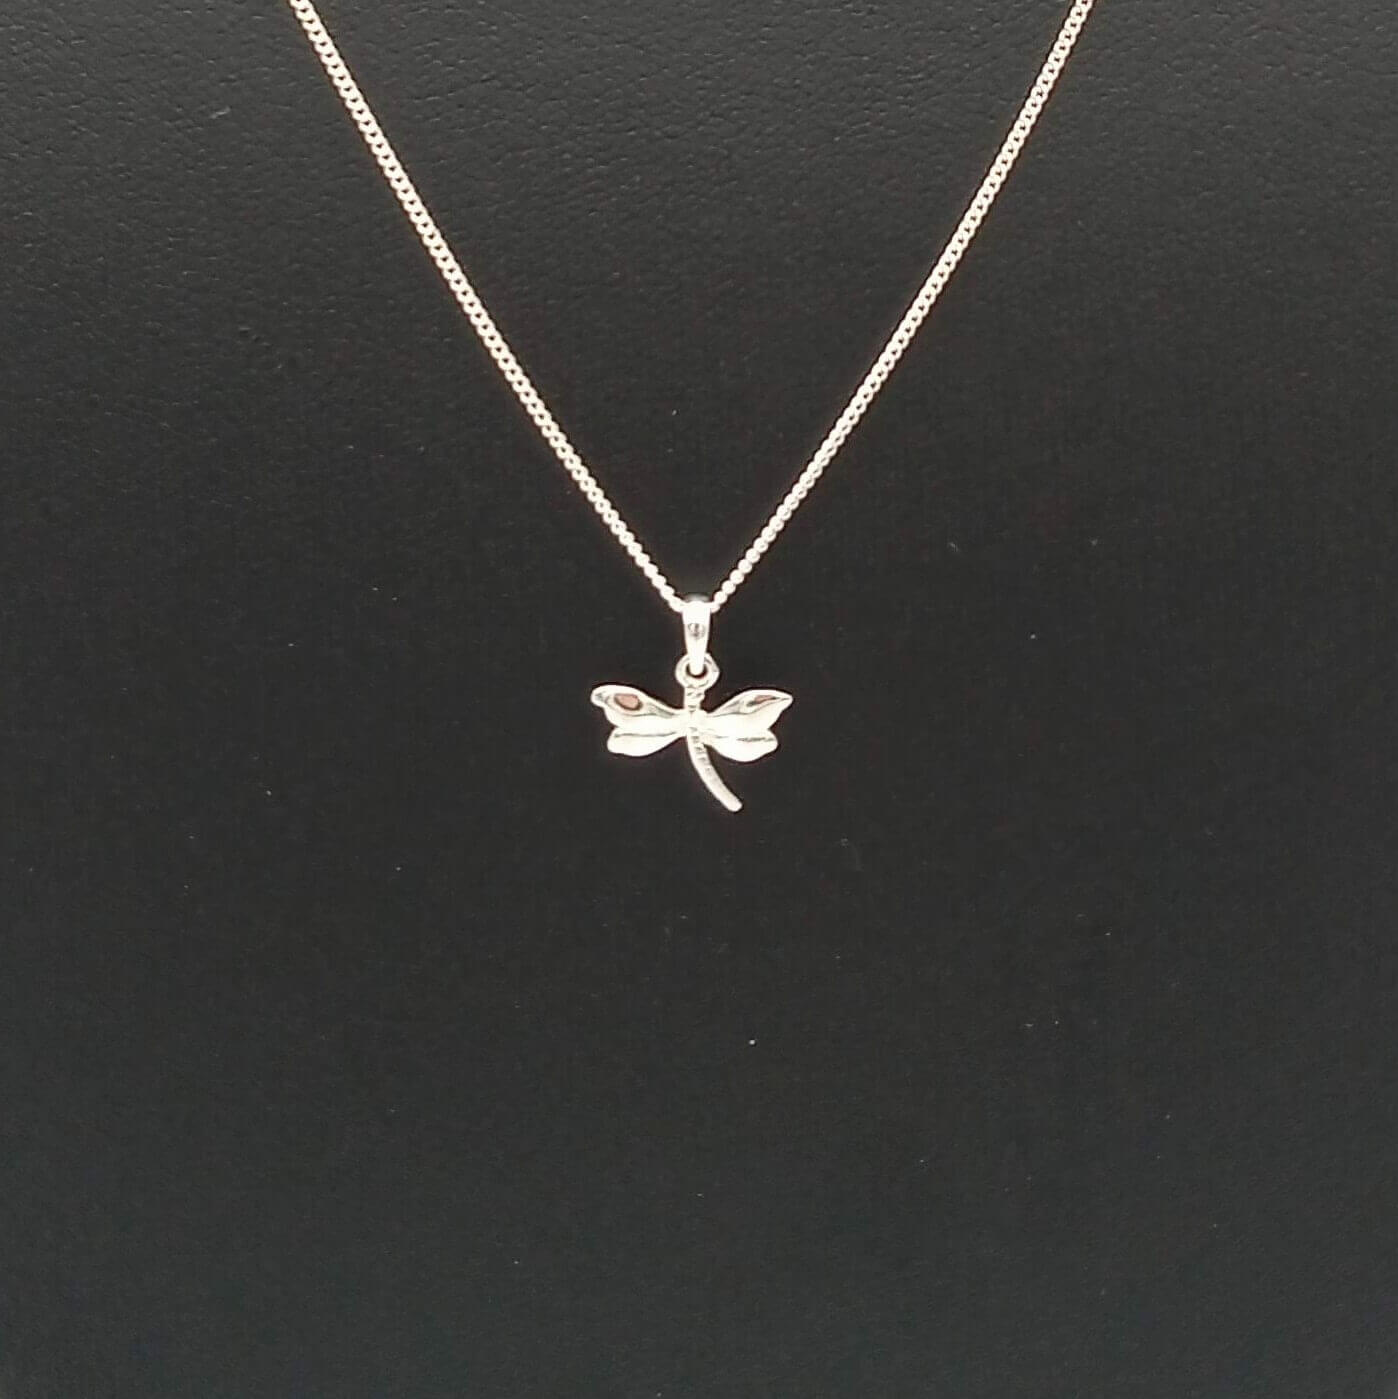 925 Sterling Silver Dragonfly Pendant